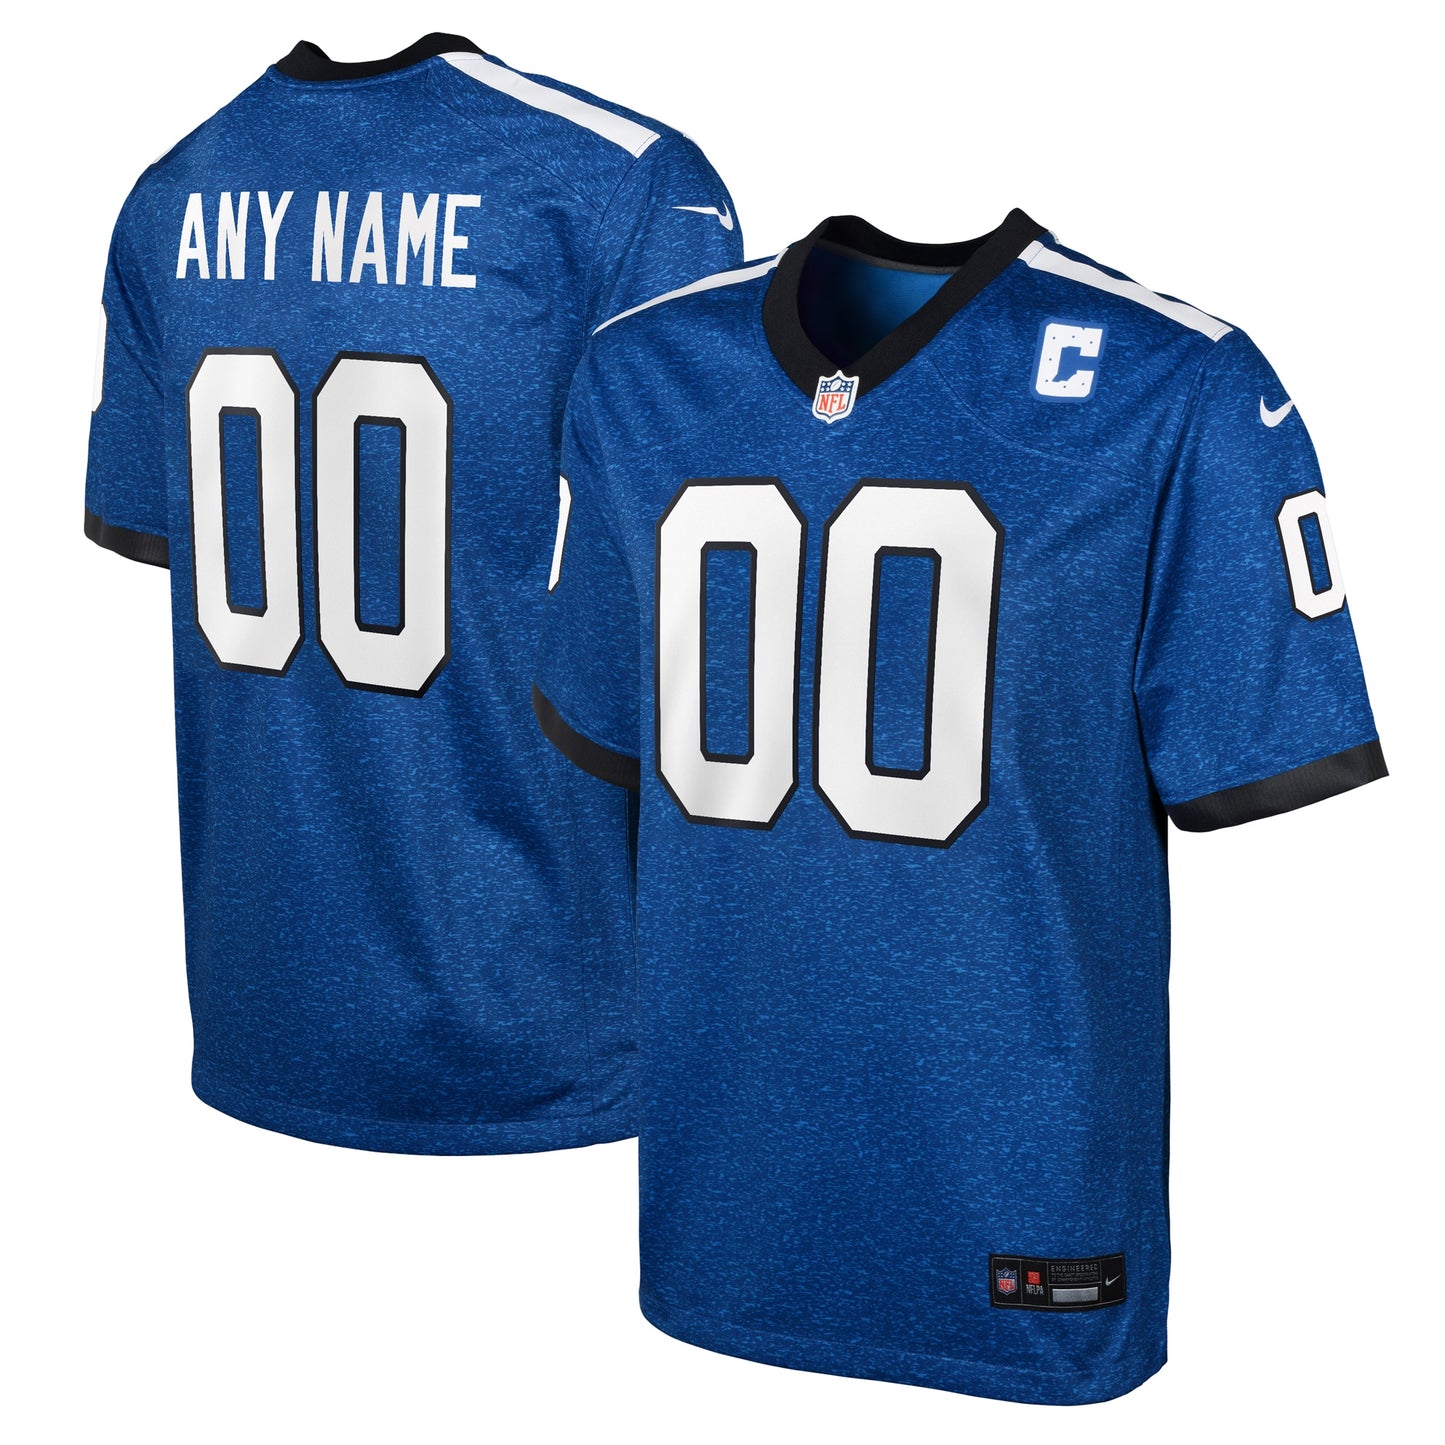 Indianapolis Colts Nike Youth Indiana Nights Alternate Custom Game Jersey - Blue